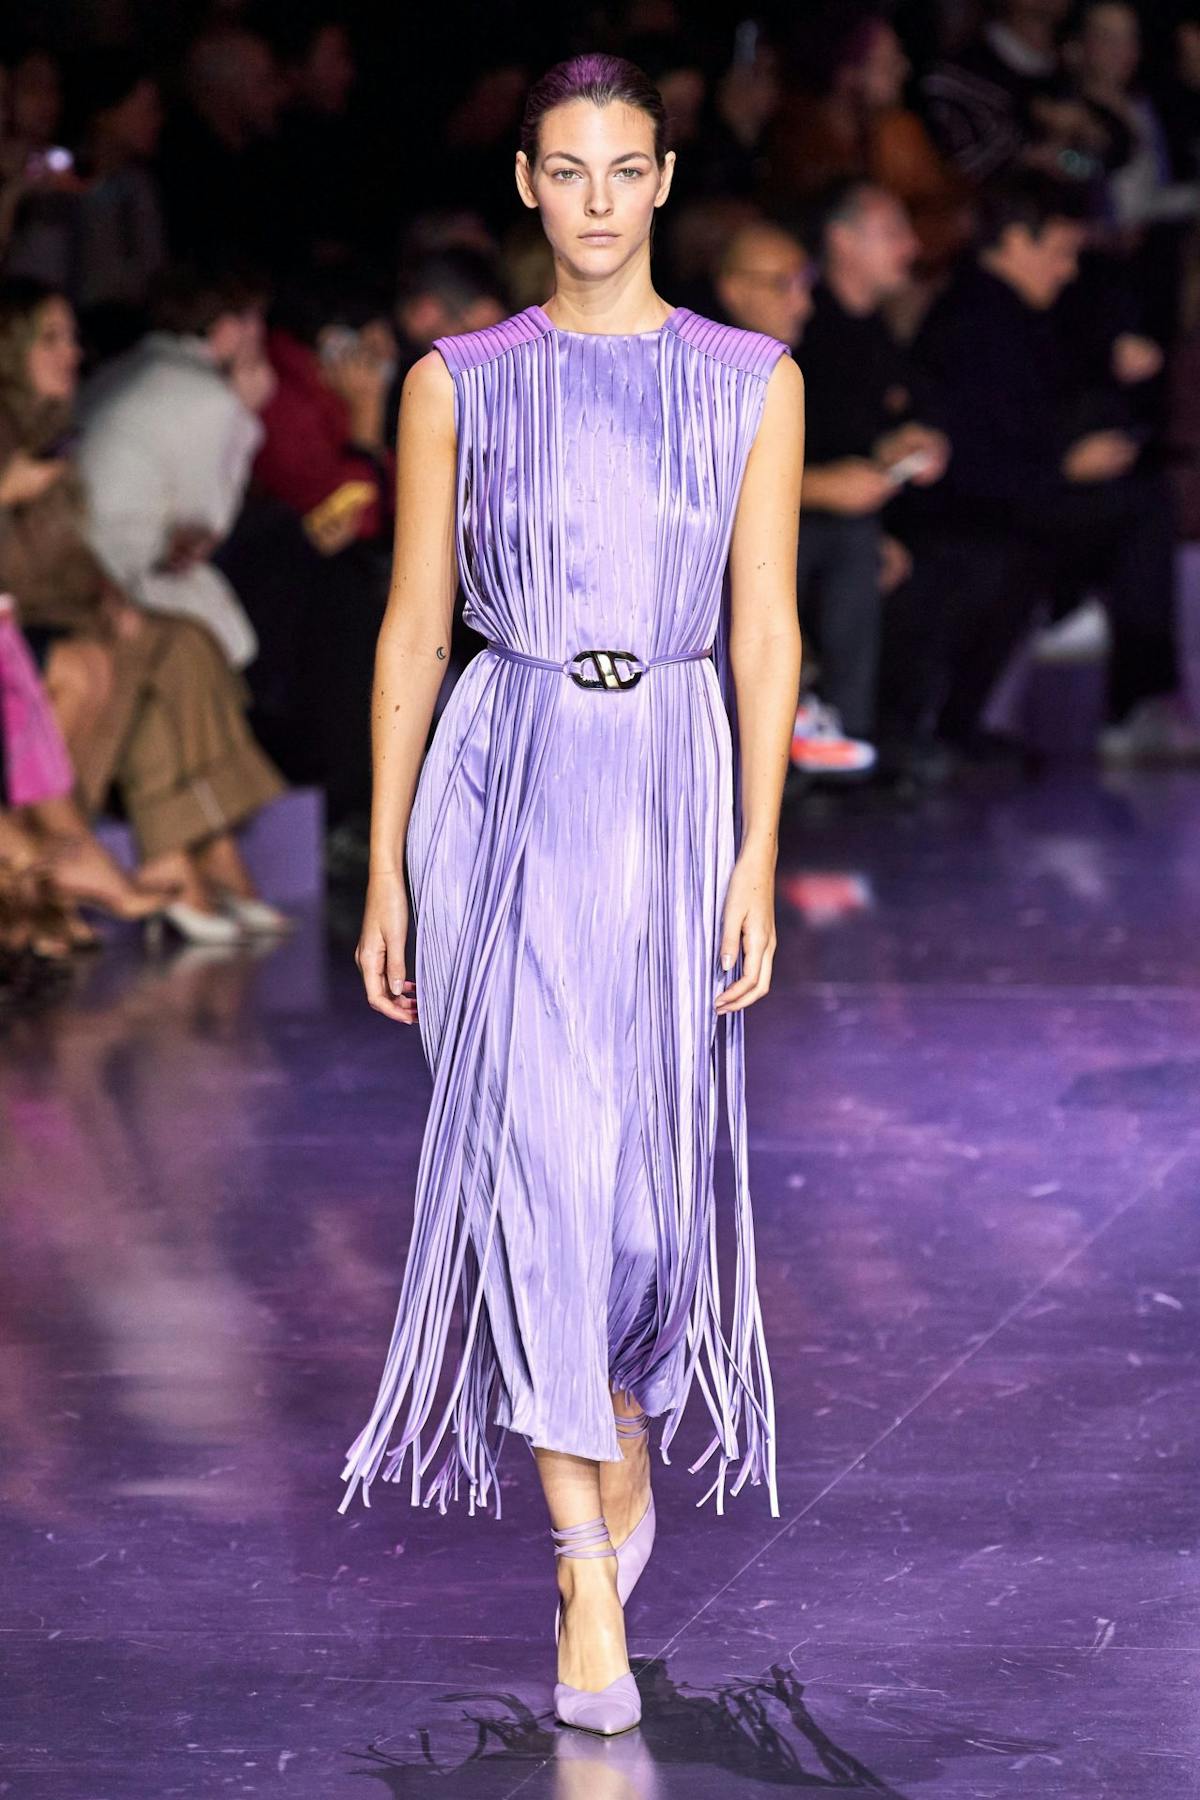 Best lilac fashion pieces to shop now